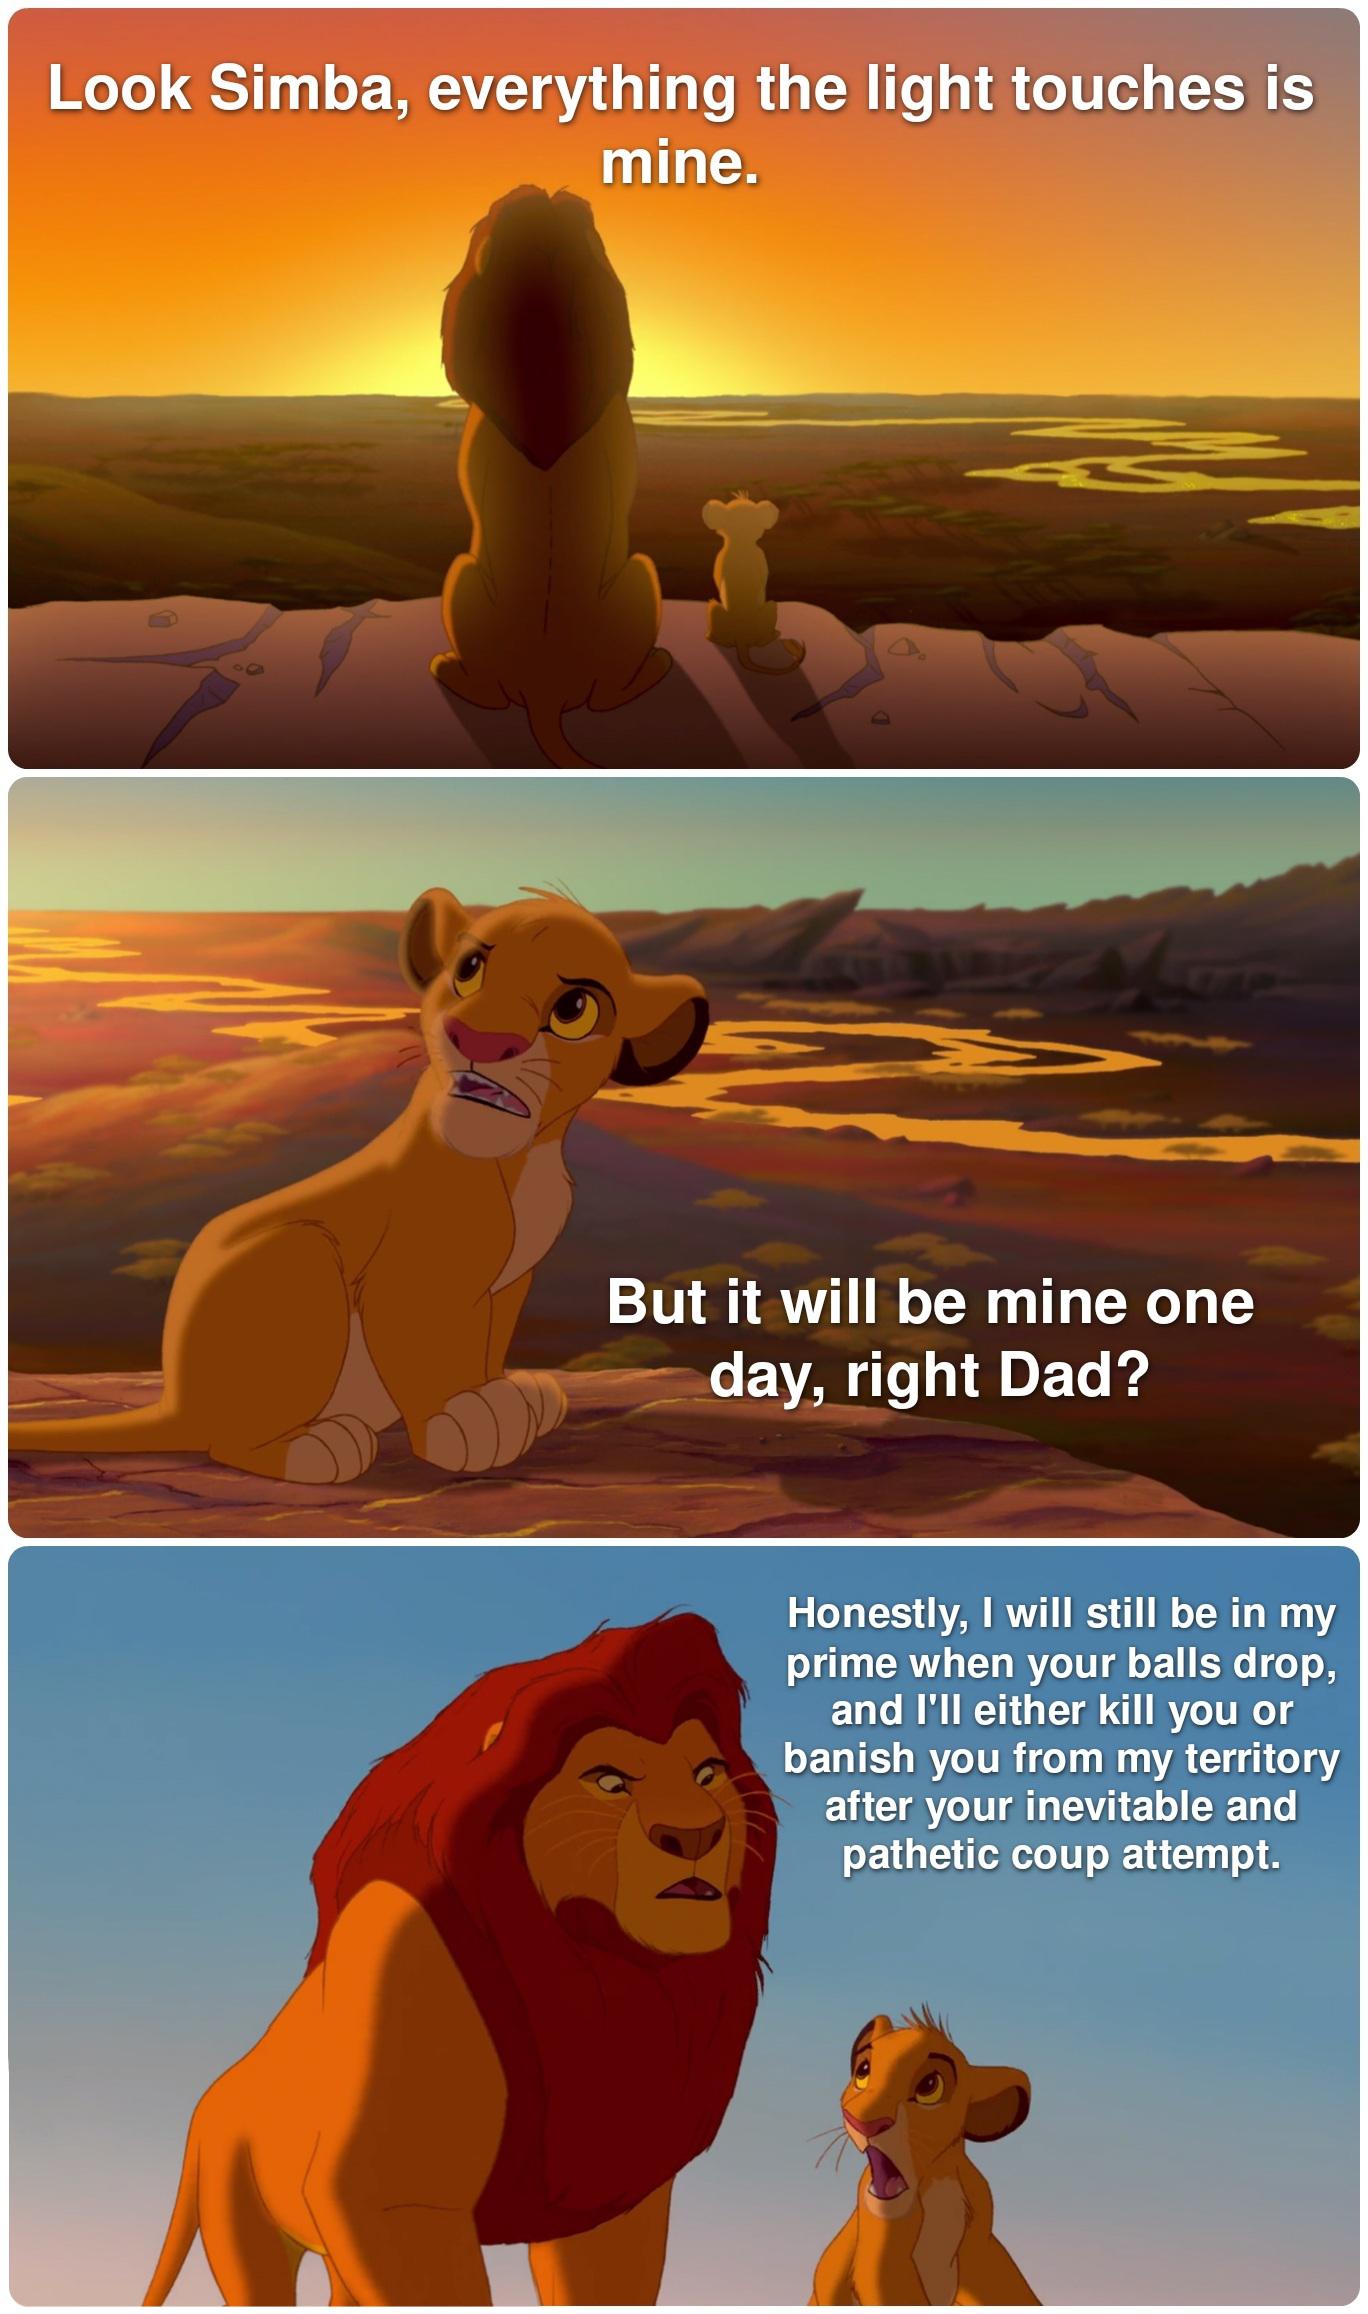 funny memes - dank memes - lion king meme template - Look Simba, everything the light touches is mine. But it will be mine one day, right Dad? Honestly, I will still be in my prime when your balls drop, and I'll either kill you or banish you from my terri